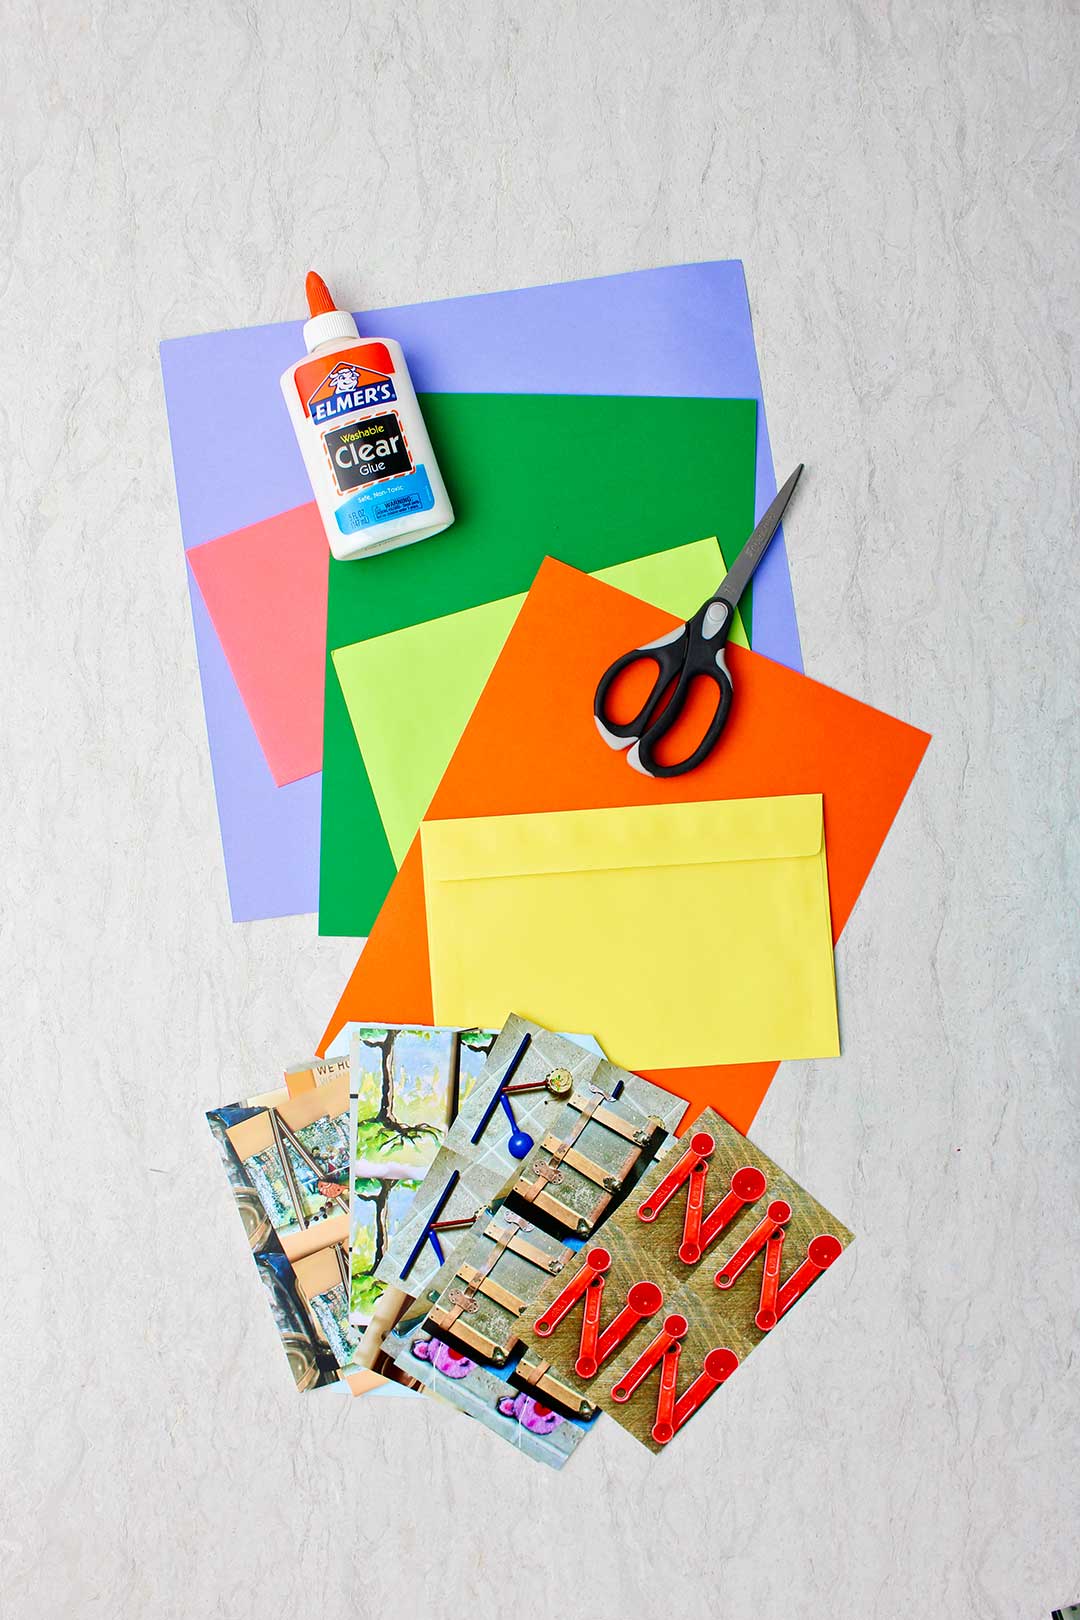 Colorful pieces of paper, white glue, scissors and printed photo letters.